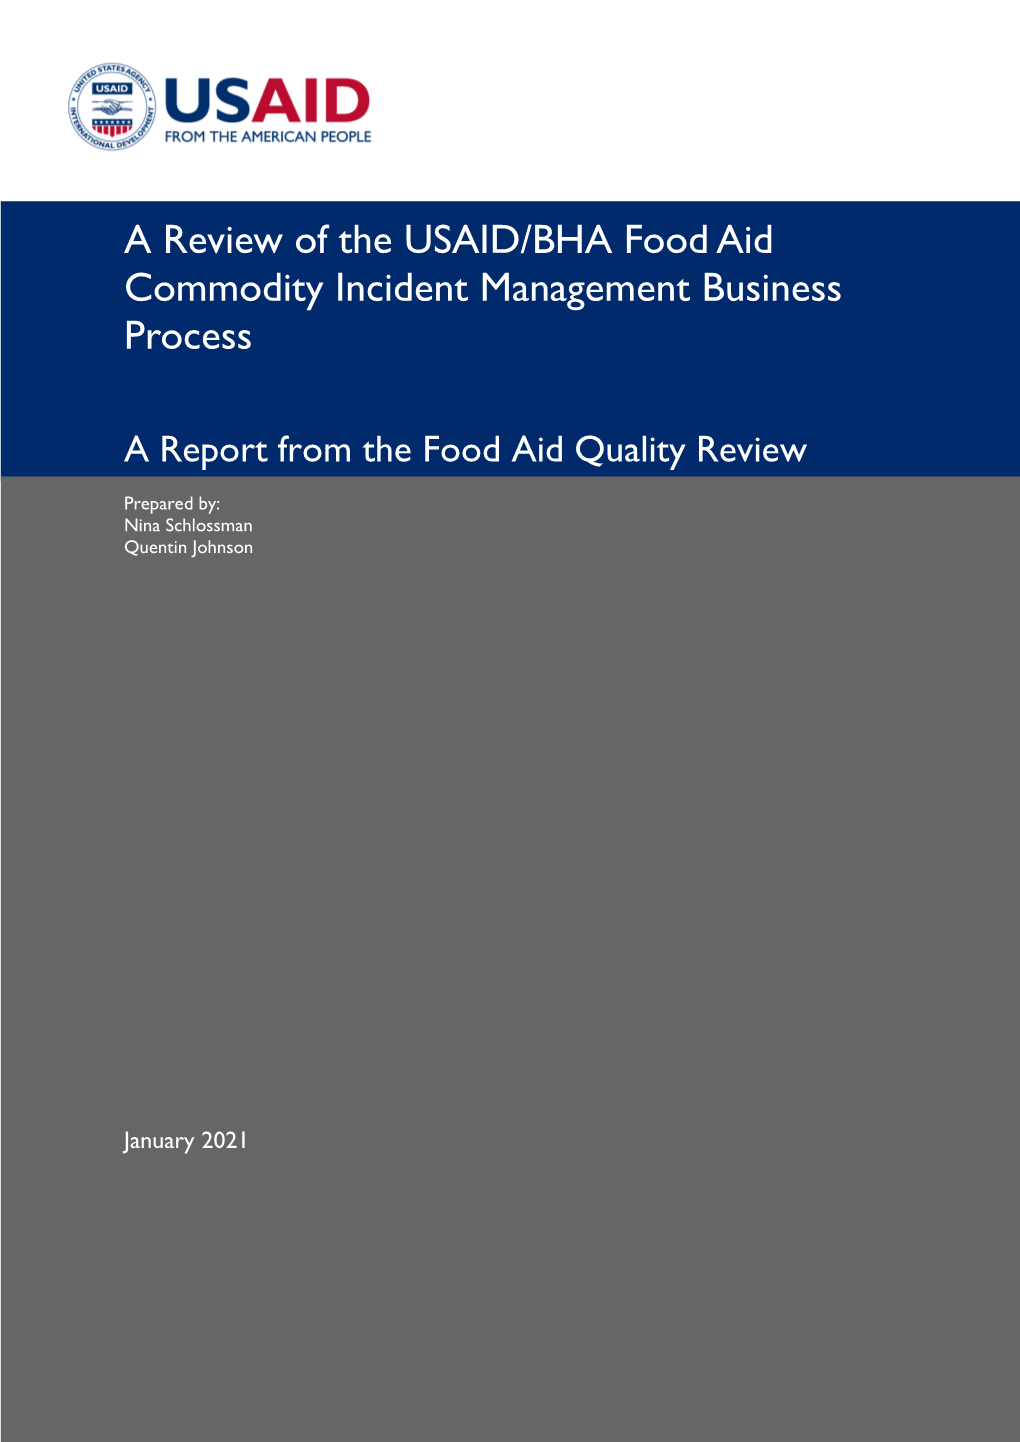 A Review of the USAID/BHA Food Aid Commodity Incident Management Business Process